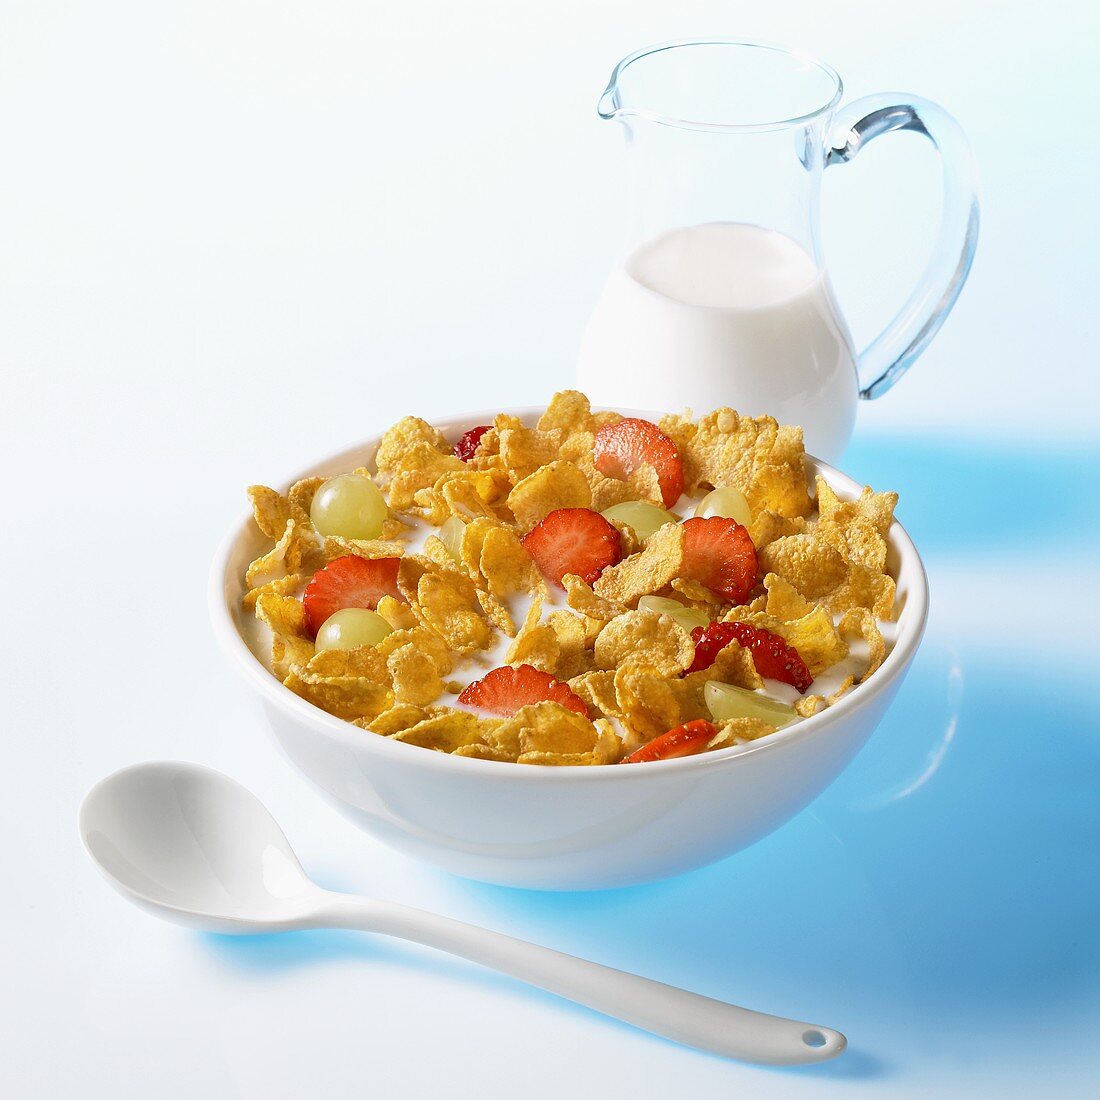 Cornflakes with grapes, strawberries and milk